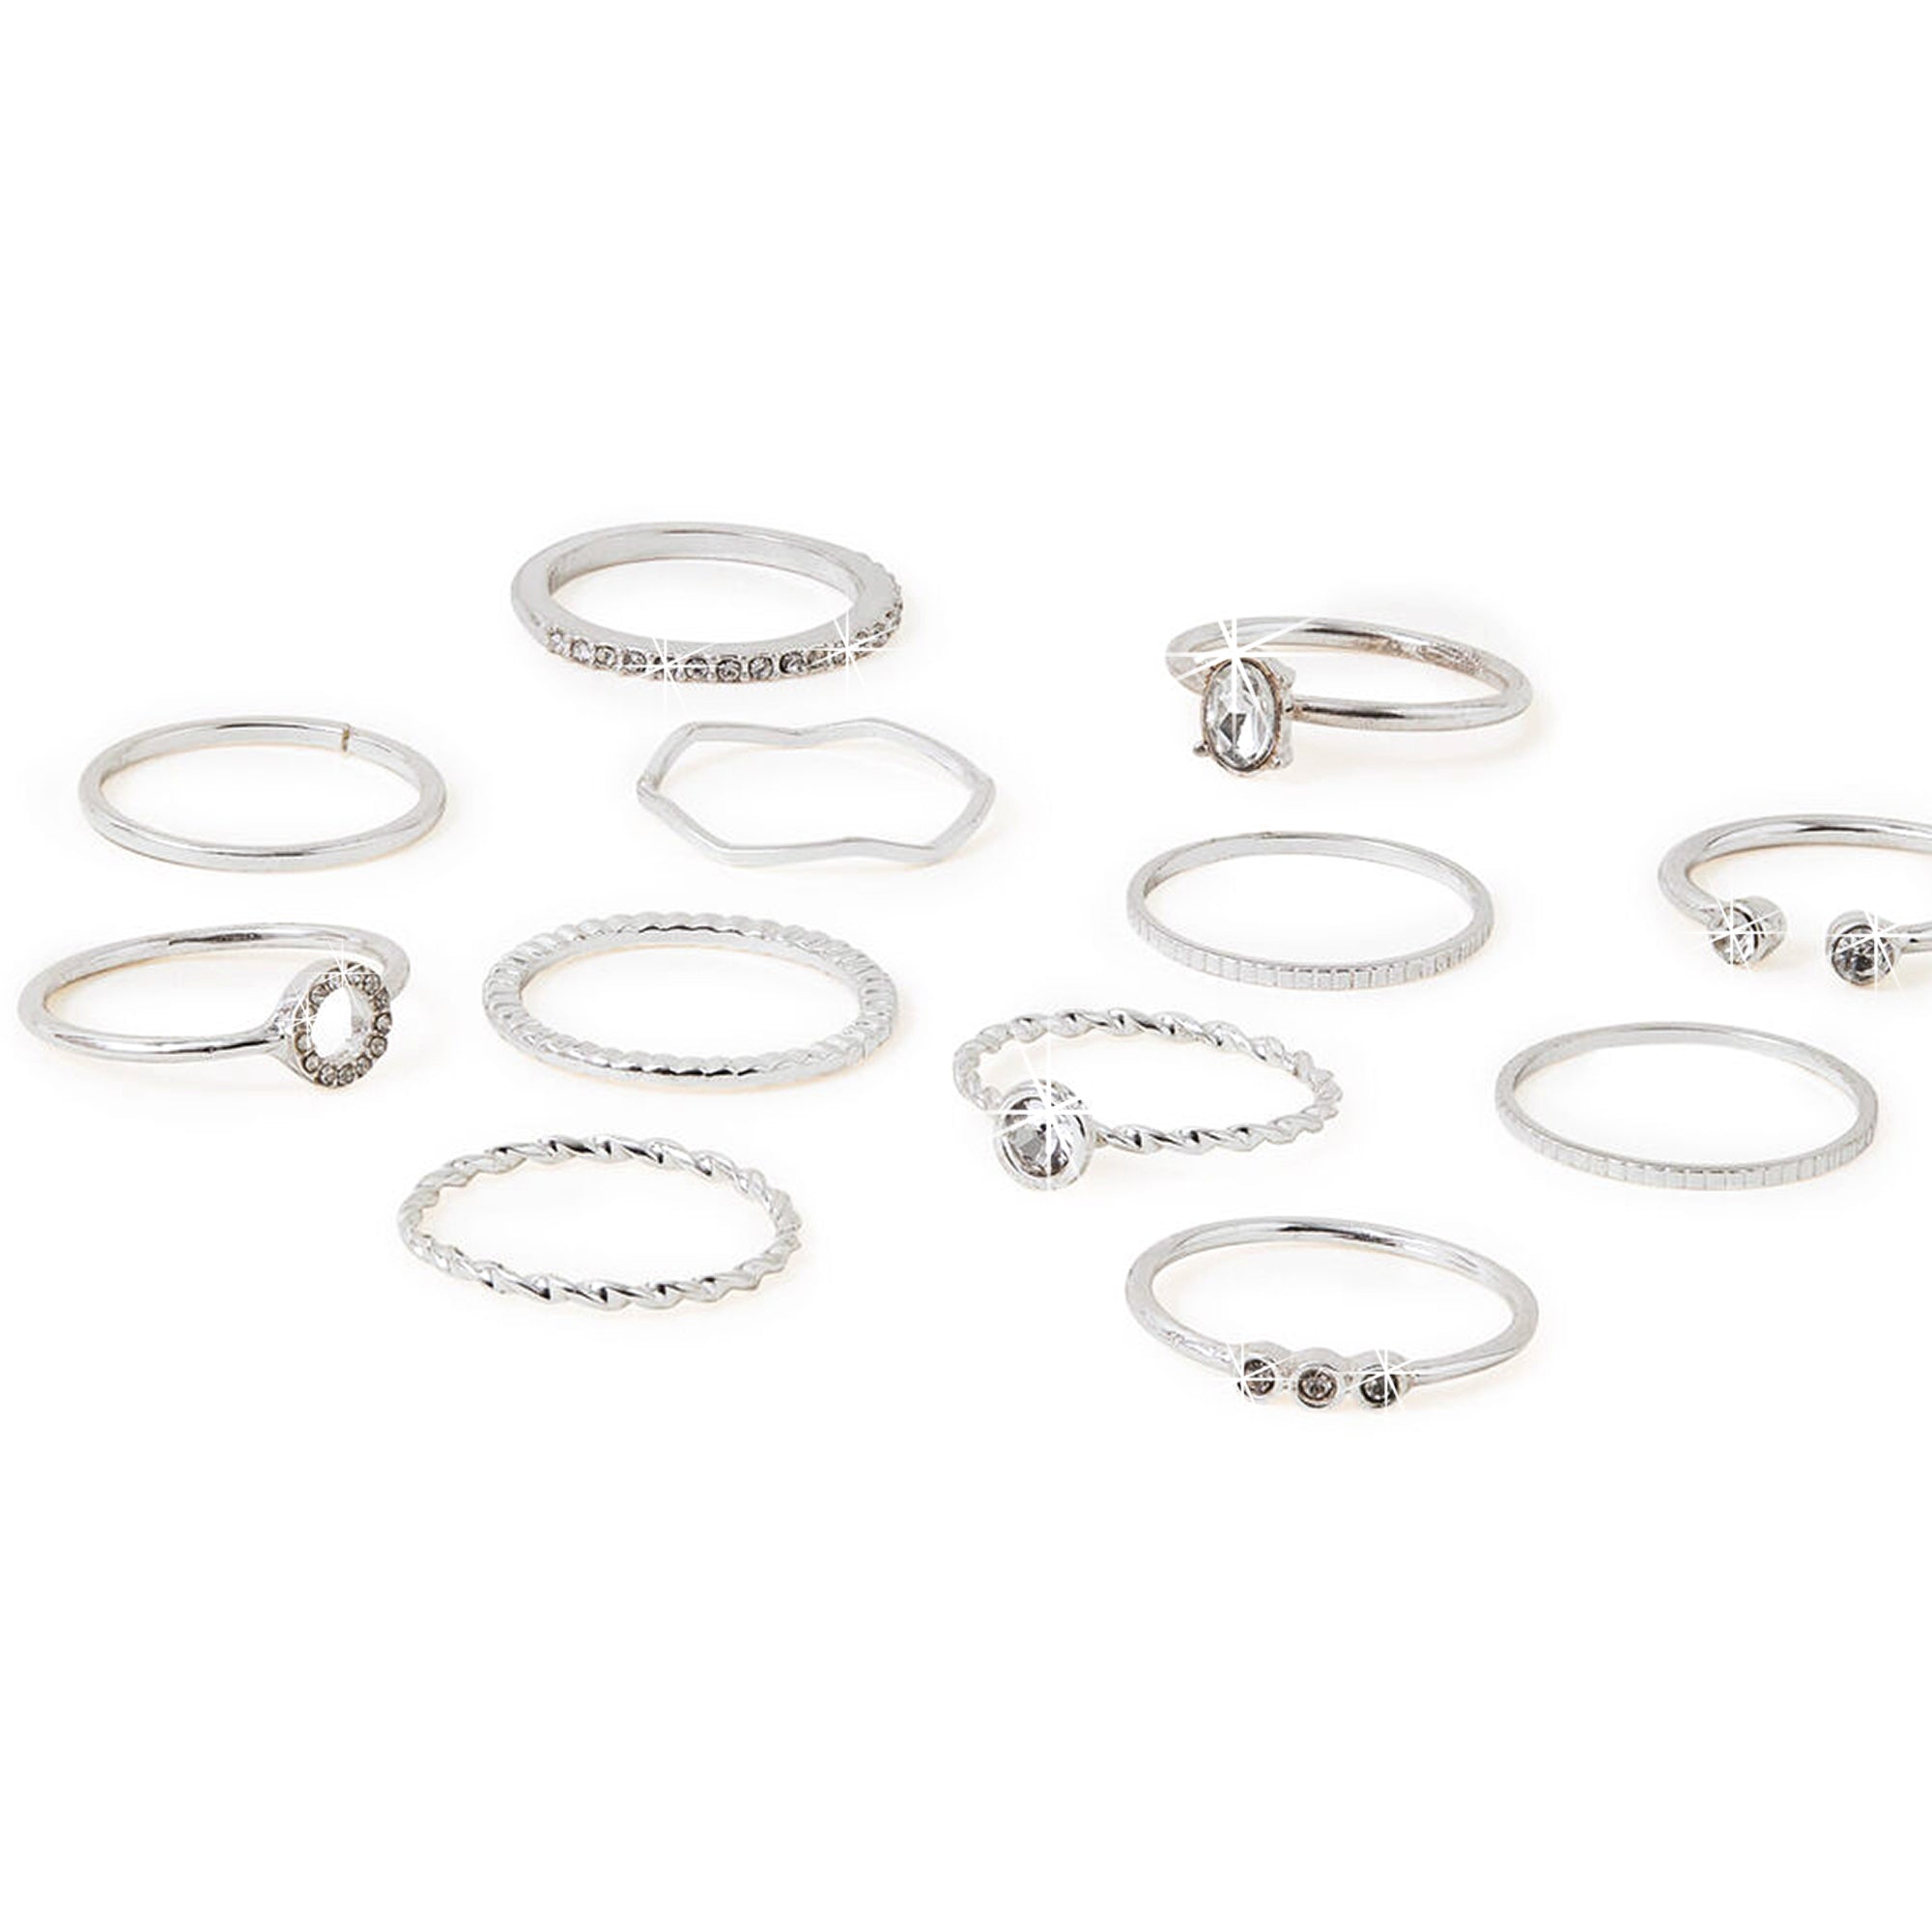 Accessorize London Women's Silver Crystal Ring Pack Of 12 Large